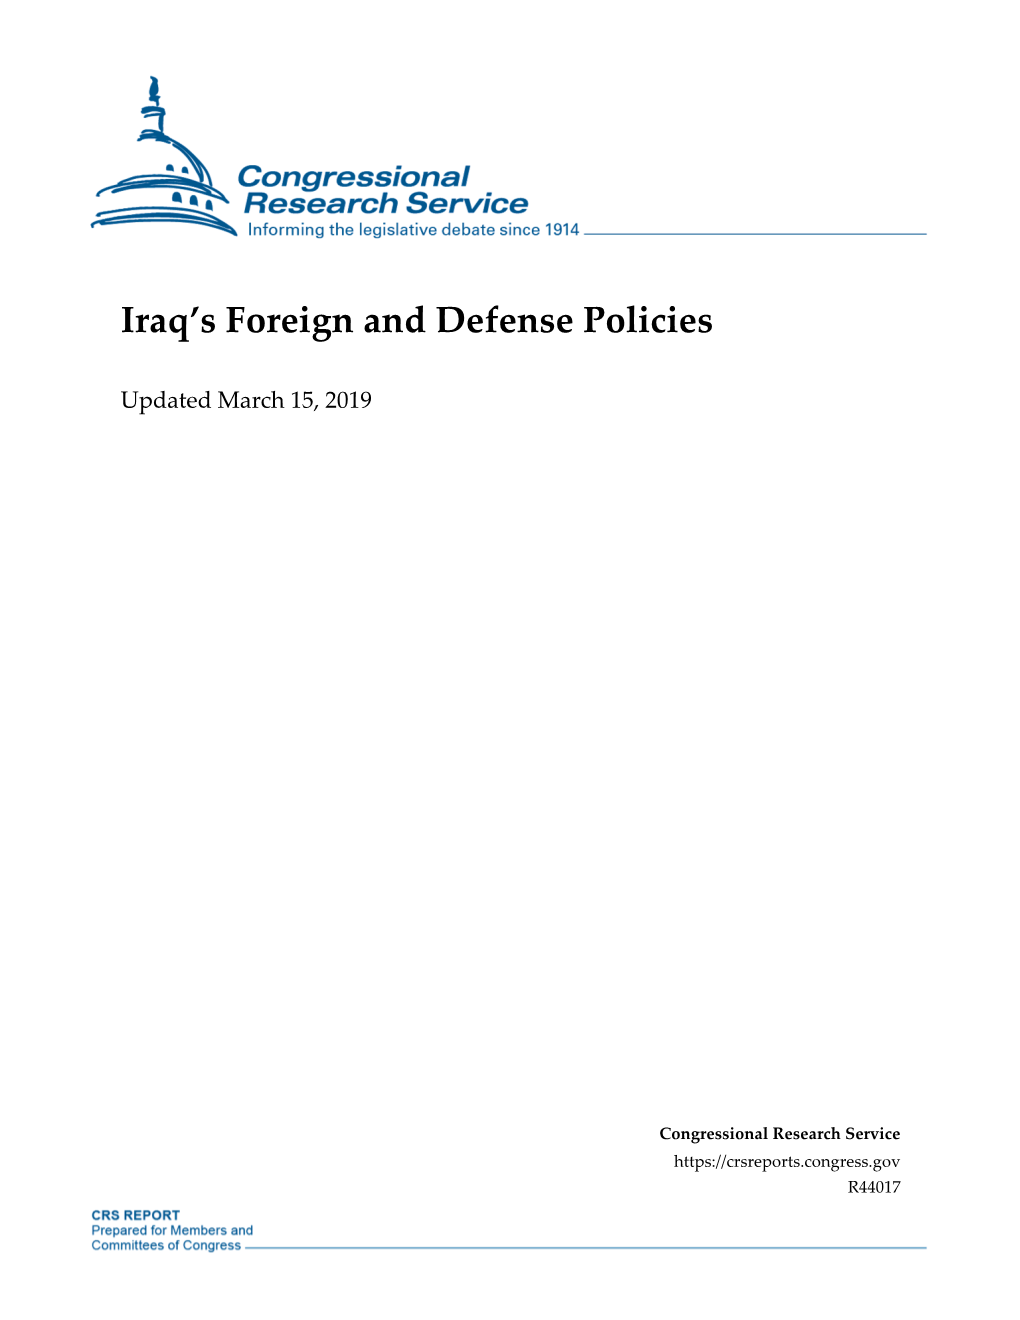 Iraq's Foreign and Defense Policies